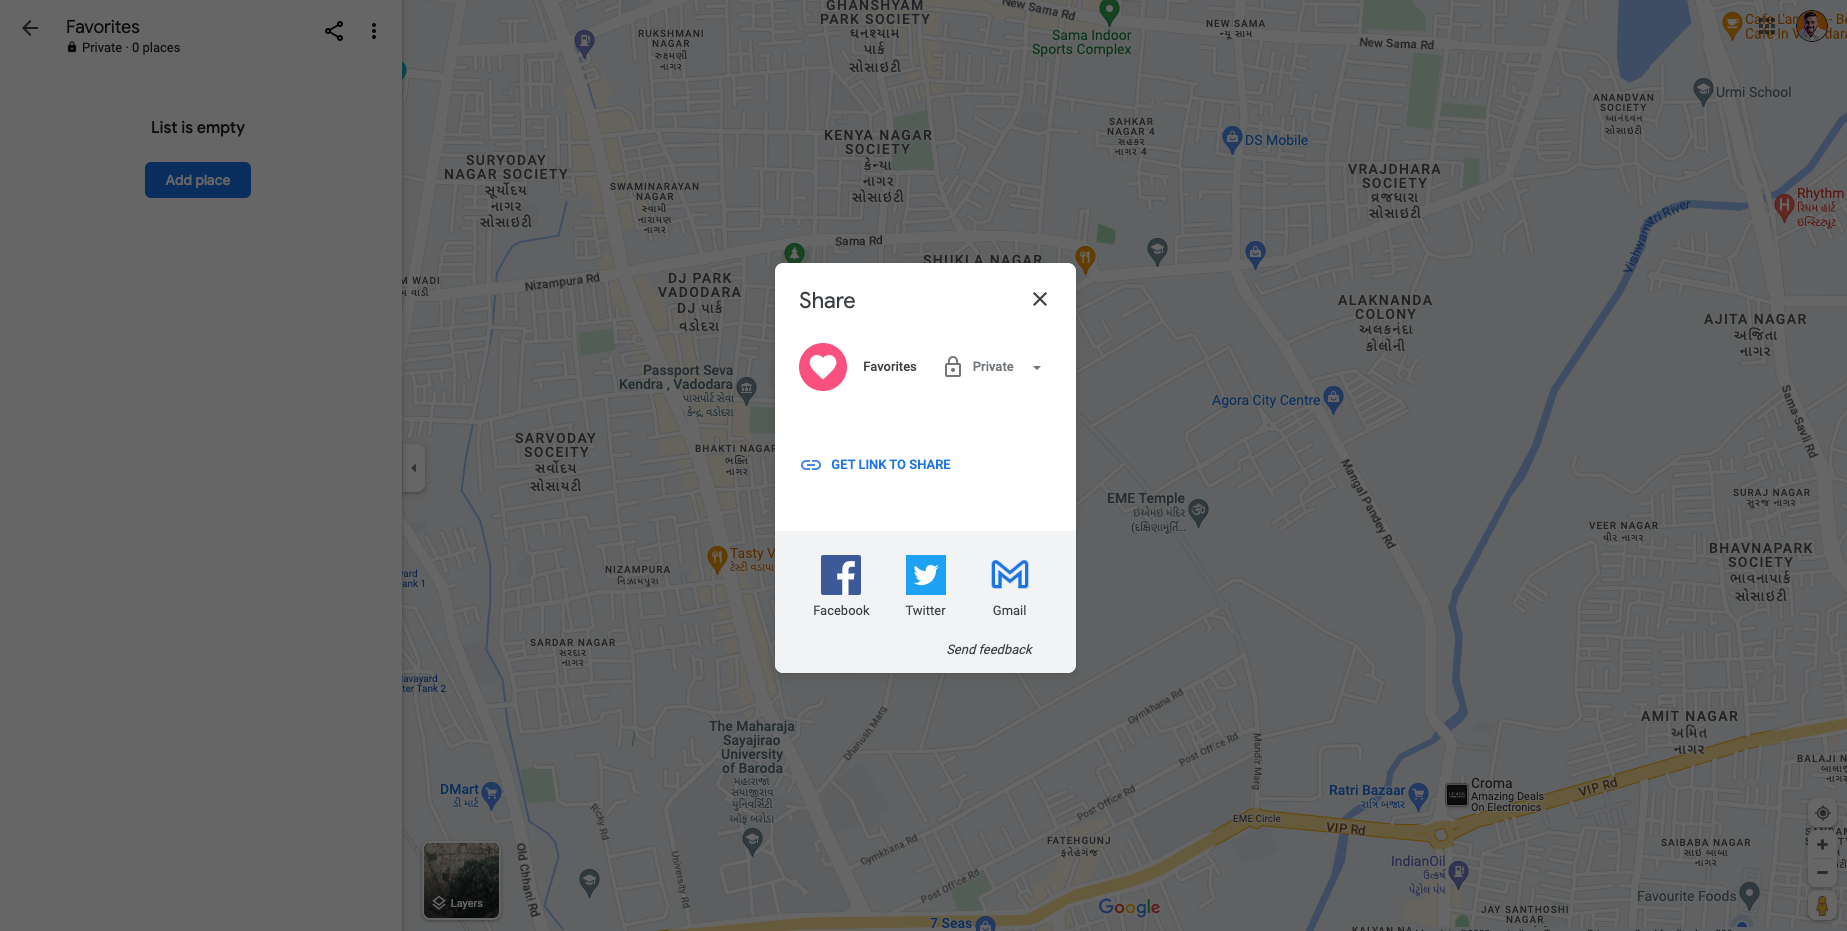 Remote.tools shows privacy settings for the new list on Google maps